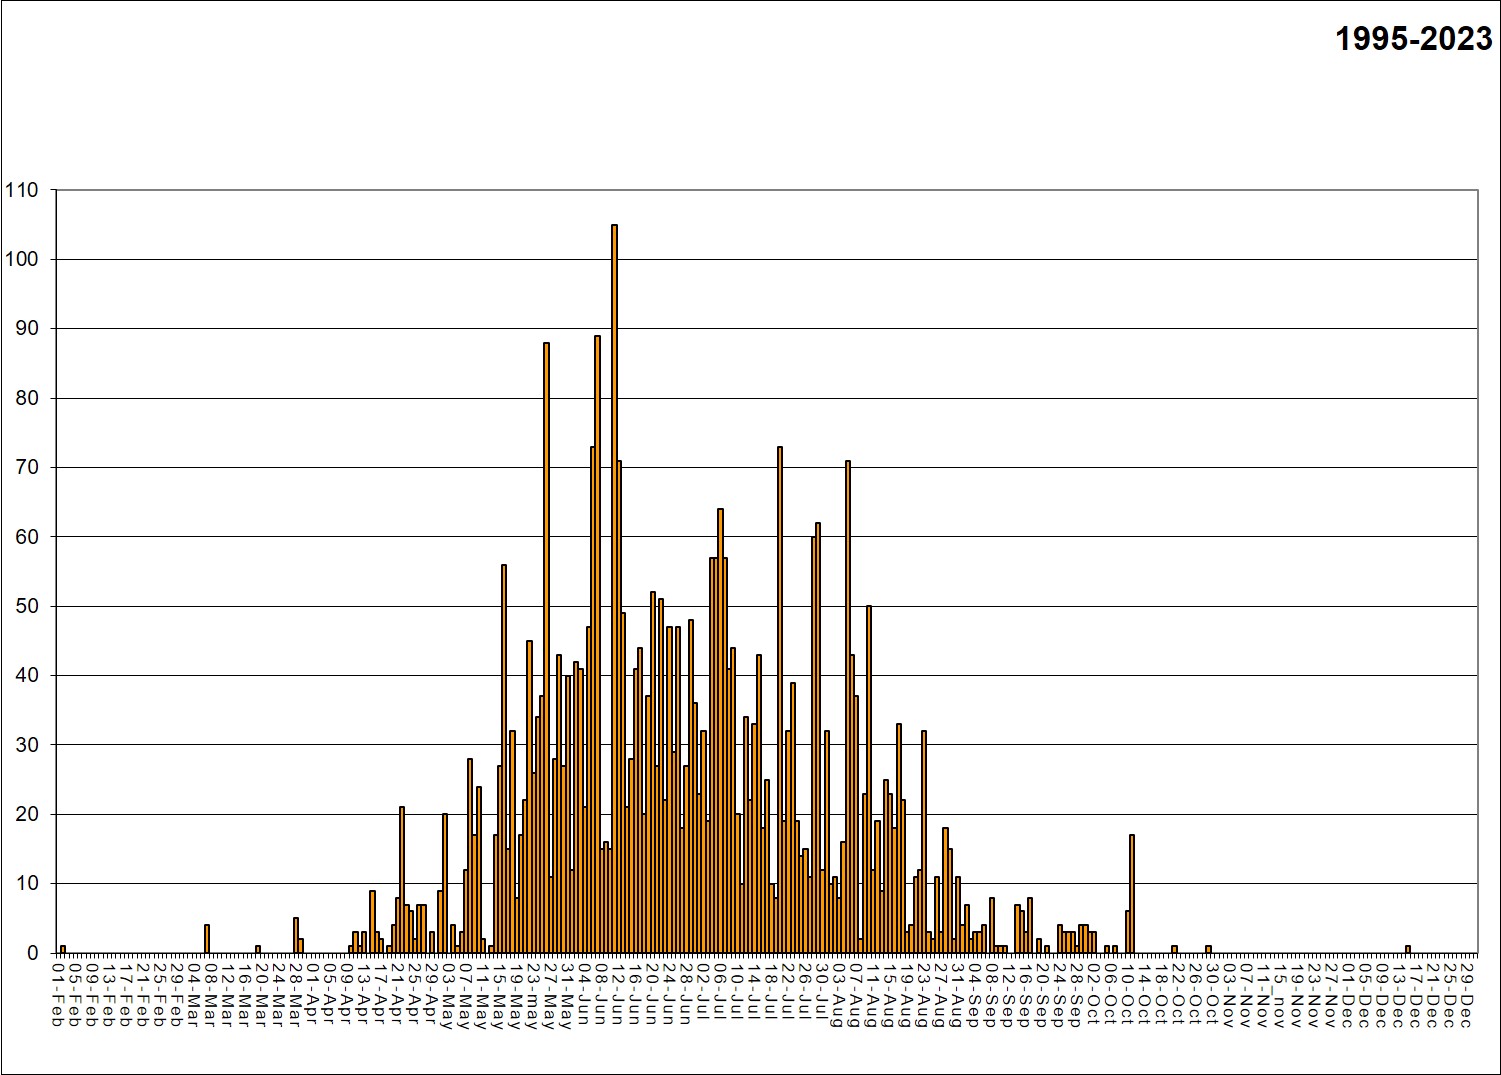 Number of all severe weather events across the NWS PUB CWA